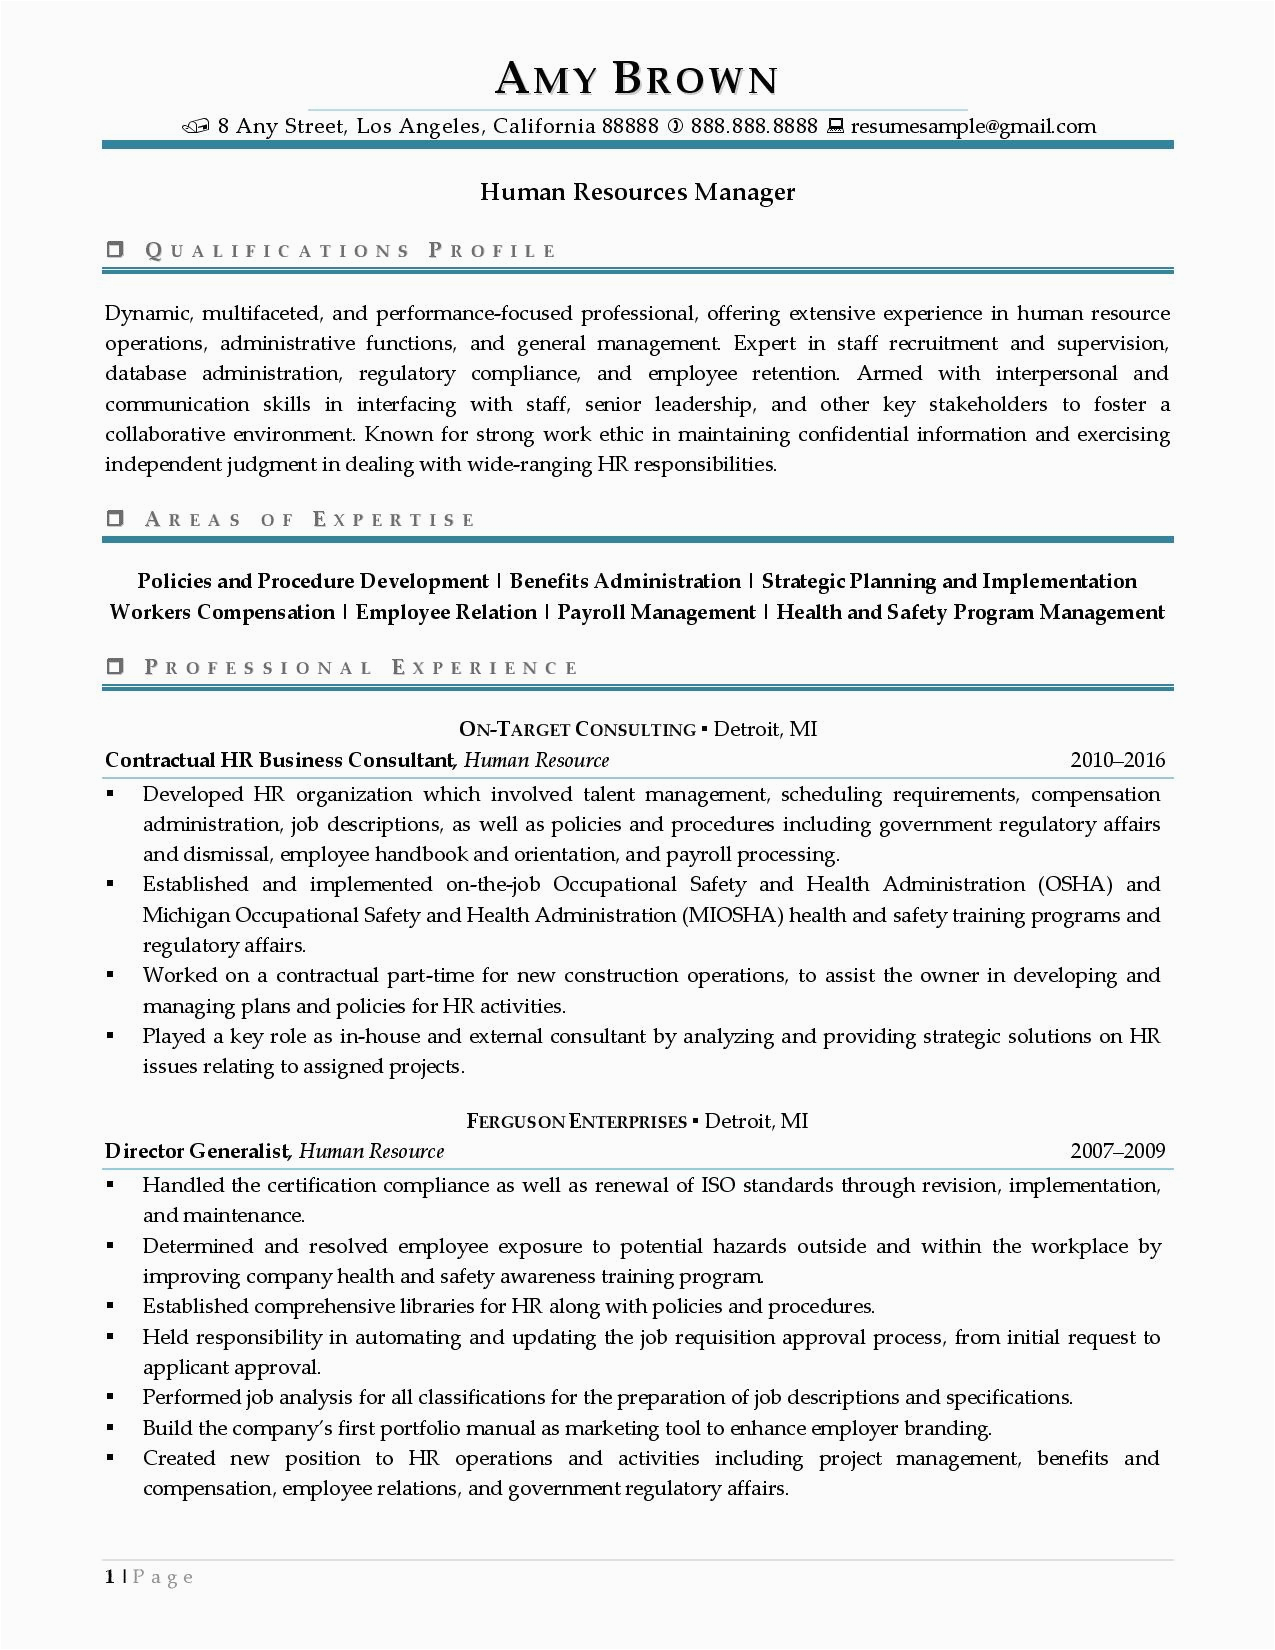 Resume Sample for Human Resource Position Human Resources Manager Resume Examples